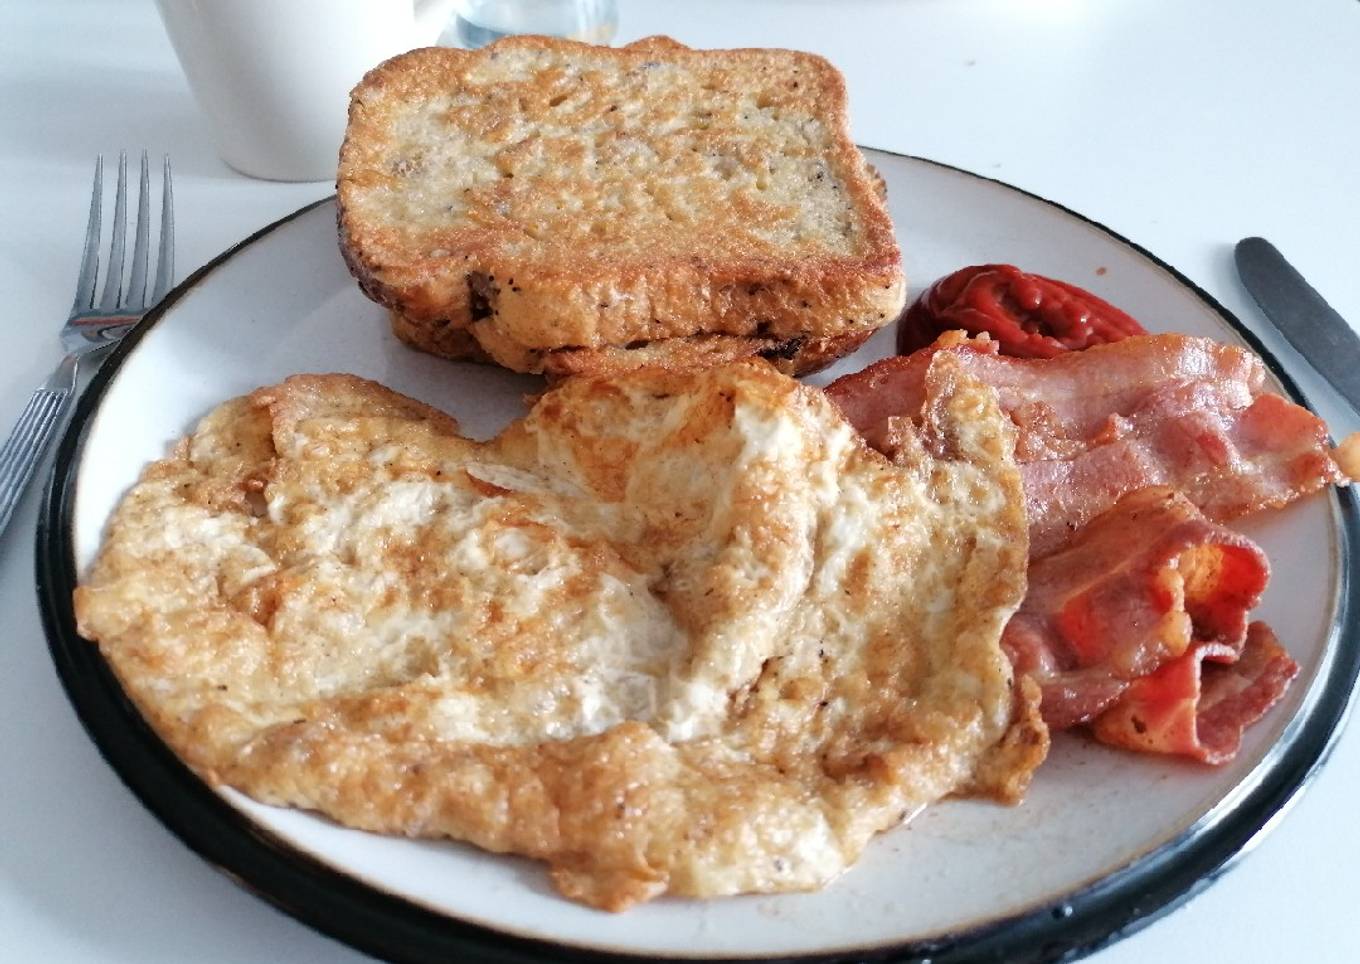 Eggy bread and bacon fried omelette